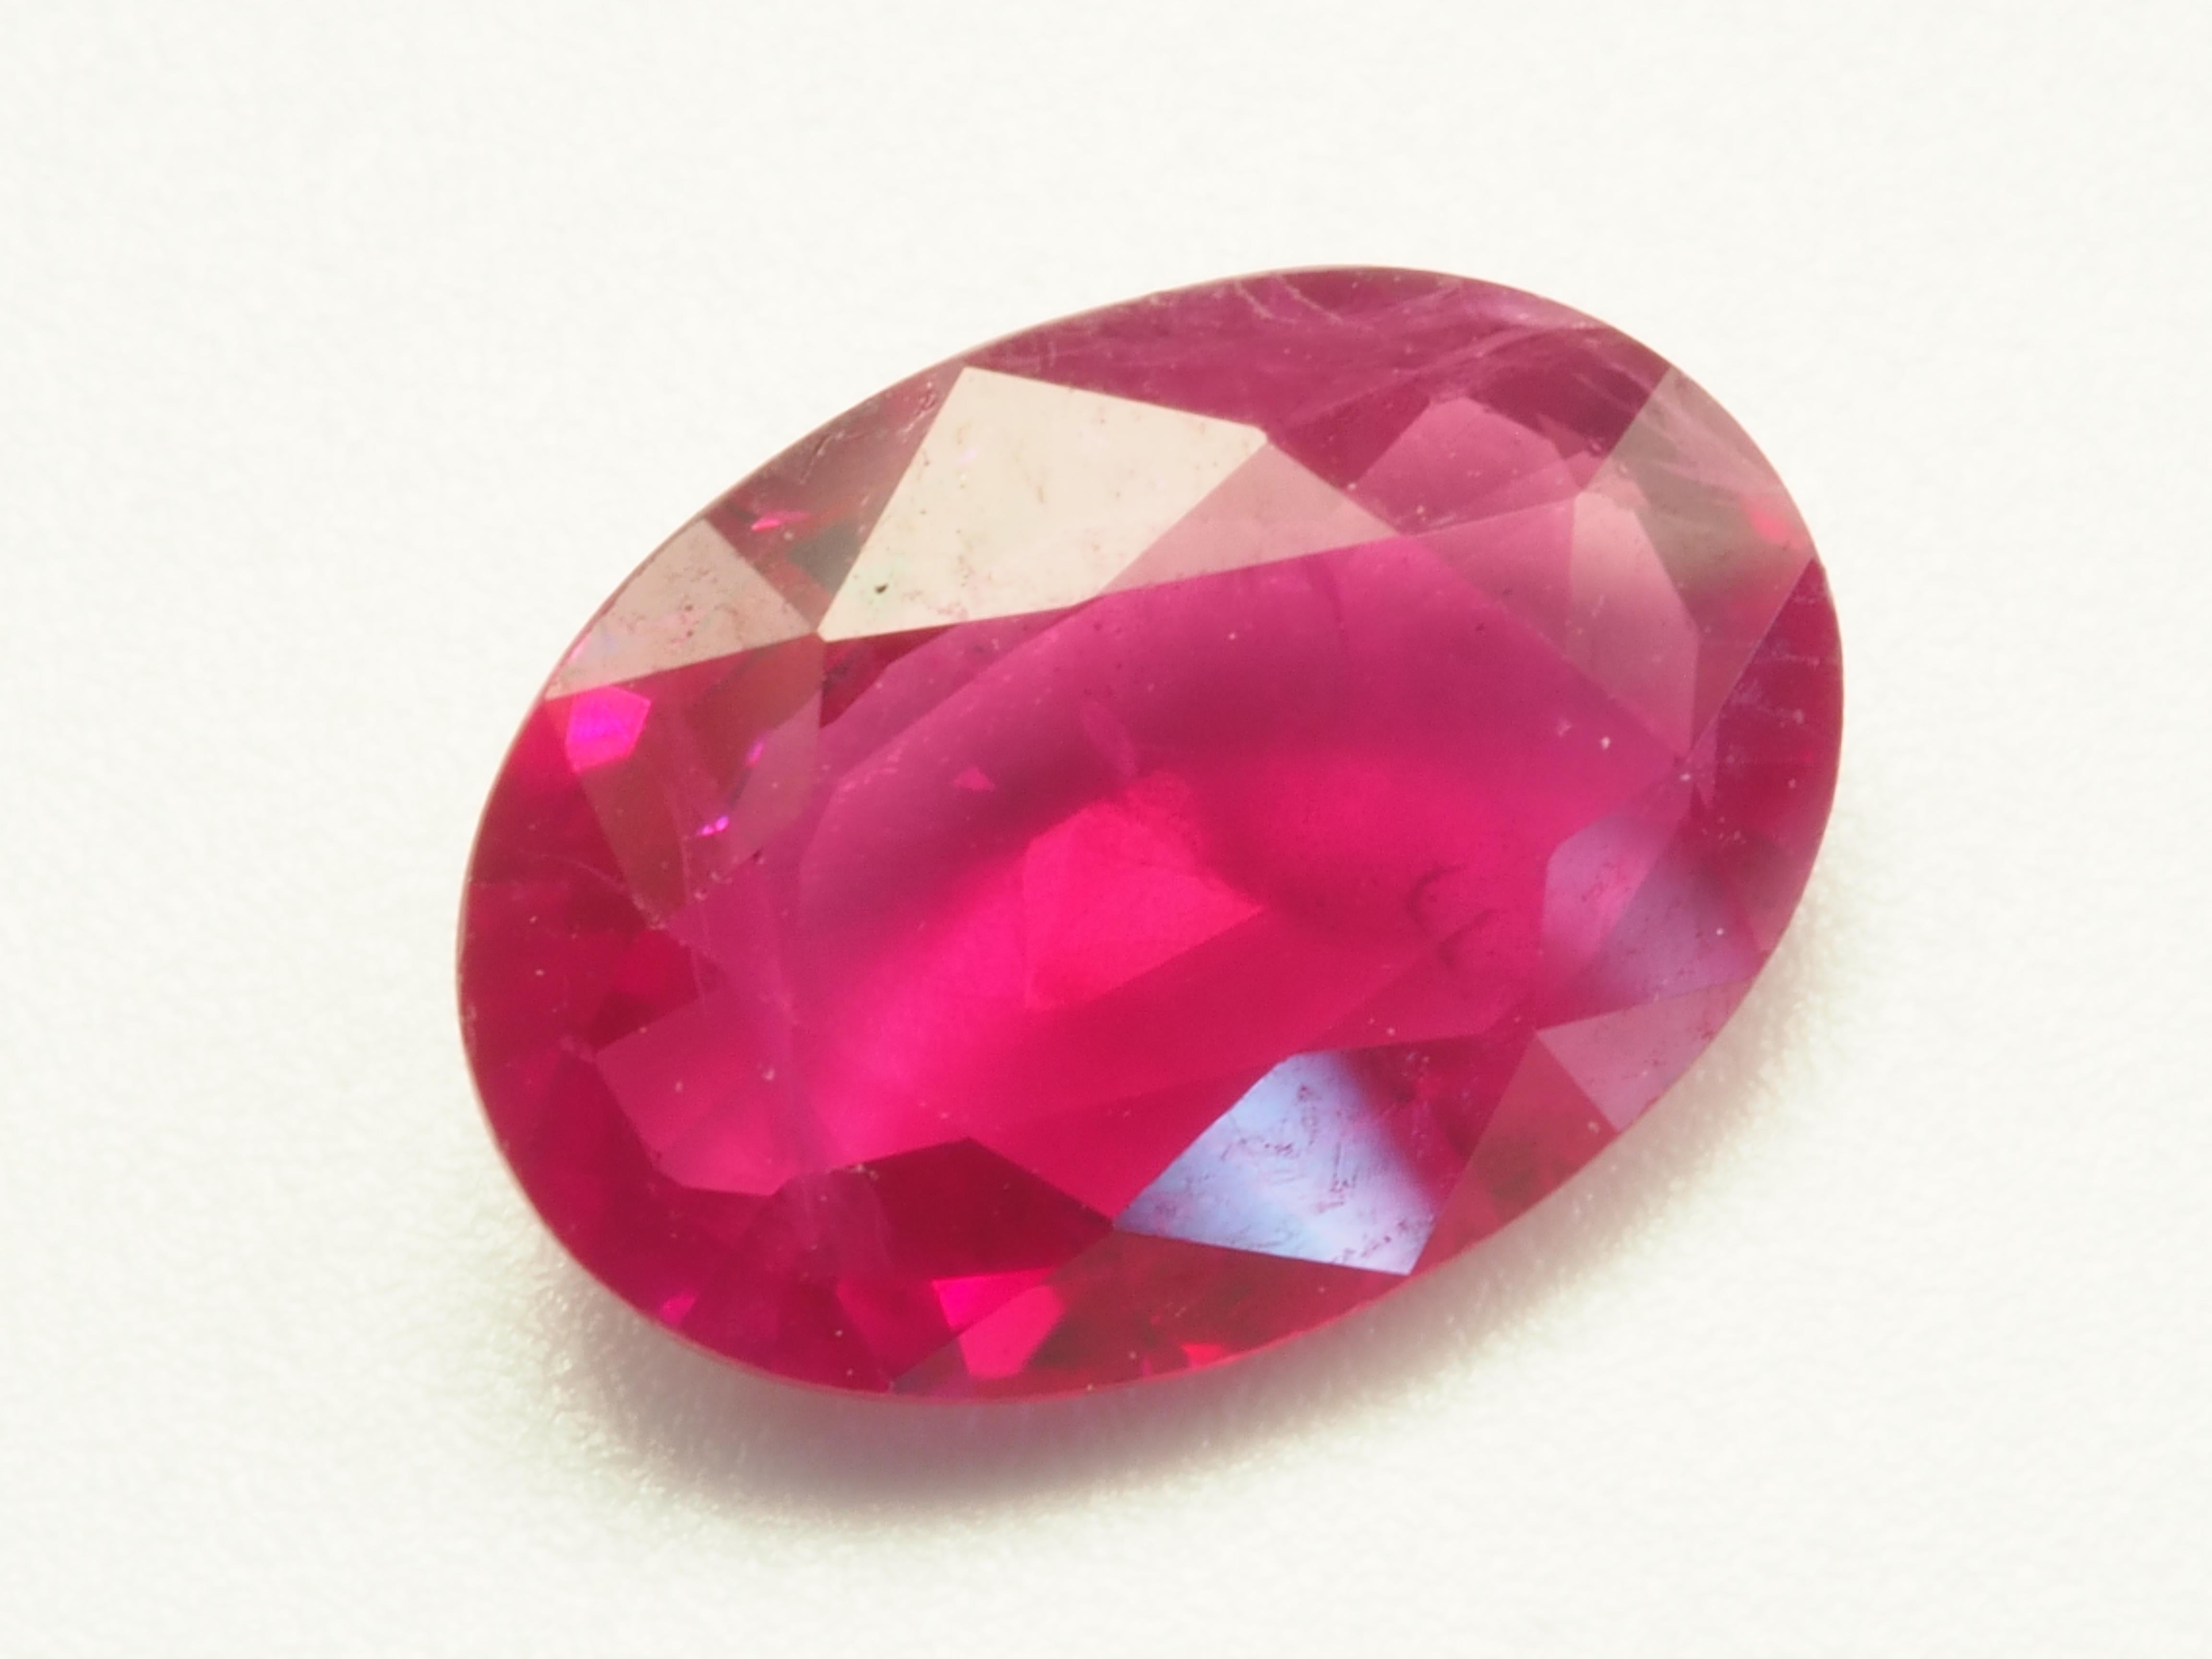 AIGS Certified 2.05ct Pinkish-Red Oval Ruby, 9.55x6.78x3.39 mm For Sale 1